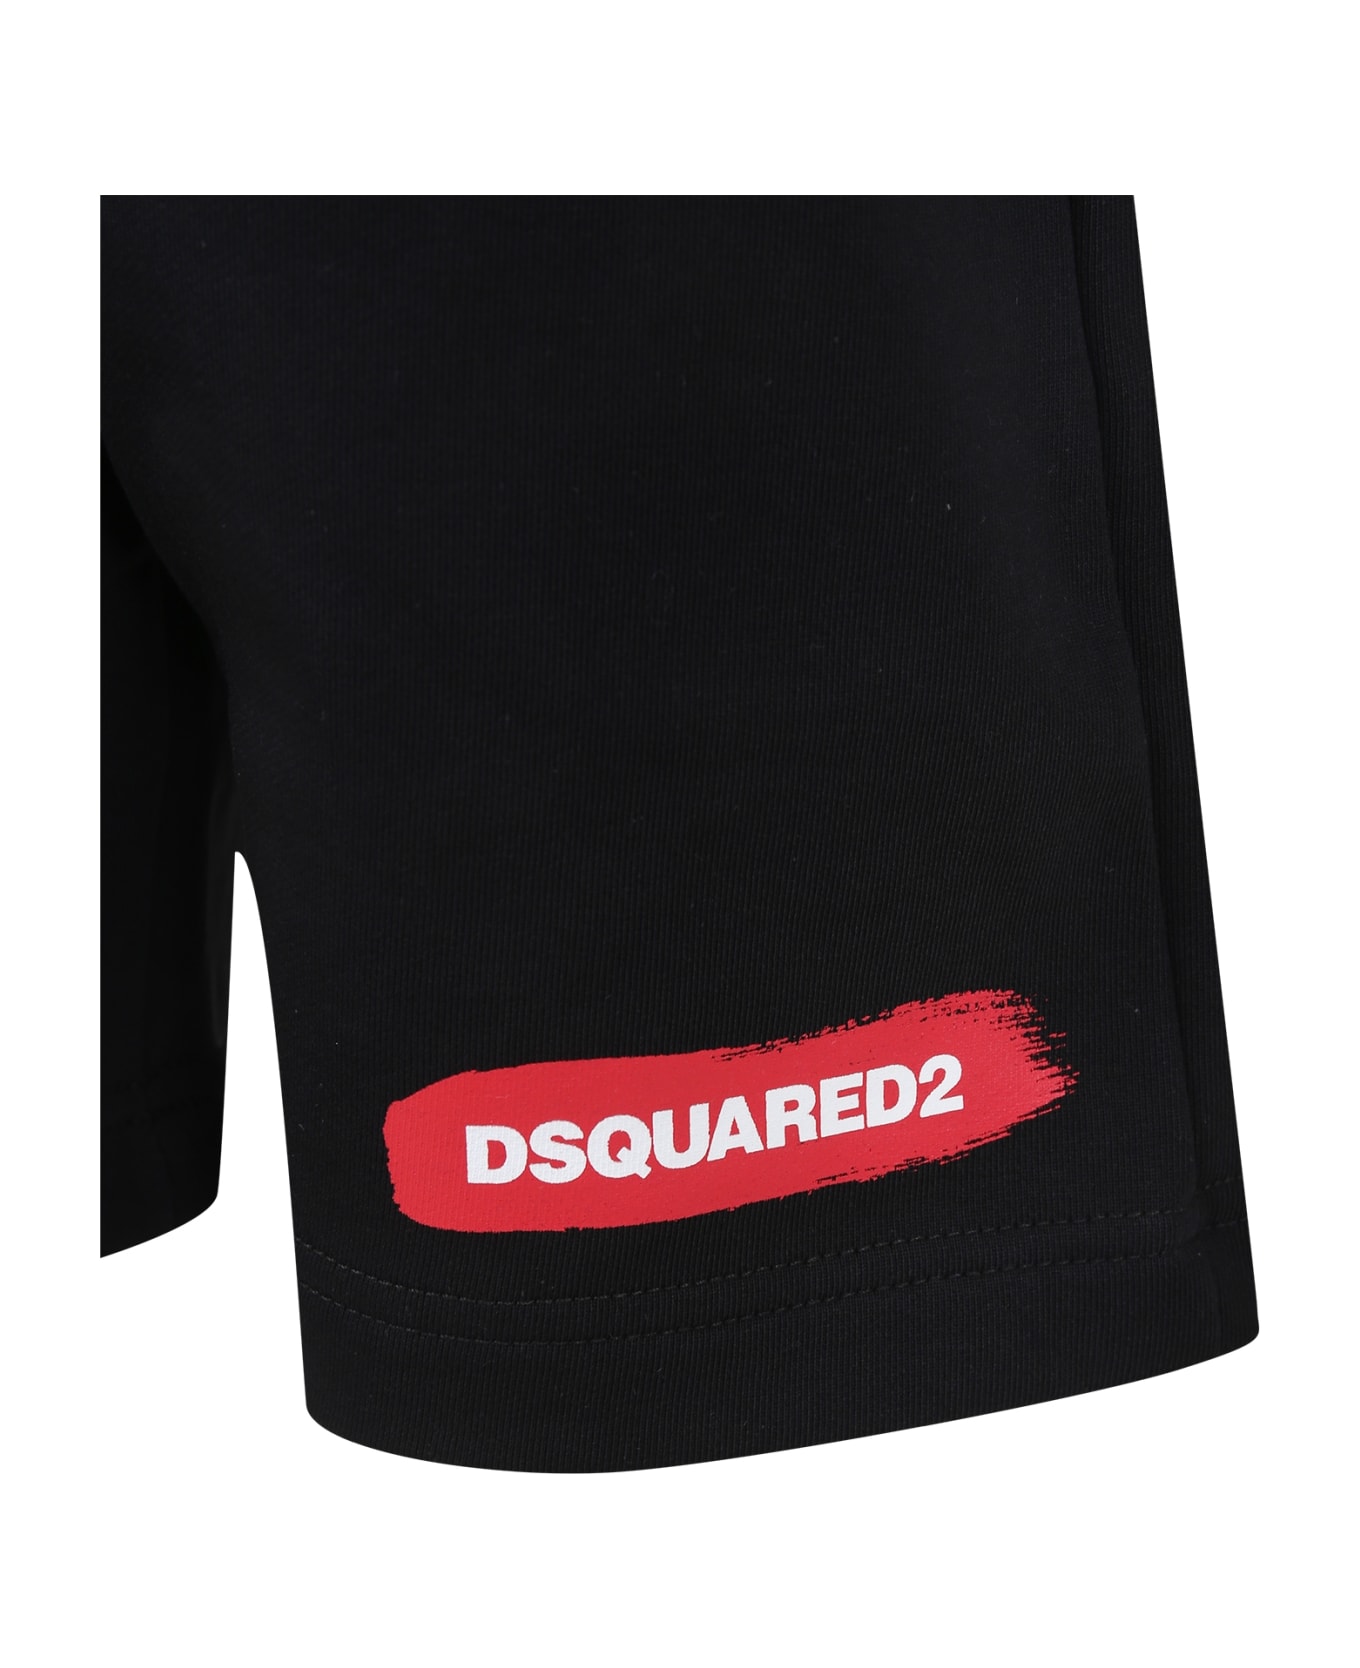 Dsquared2 Black Shorts For Boy With Logo - Black ボトムス